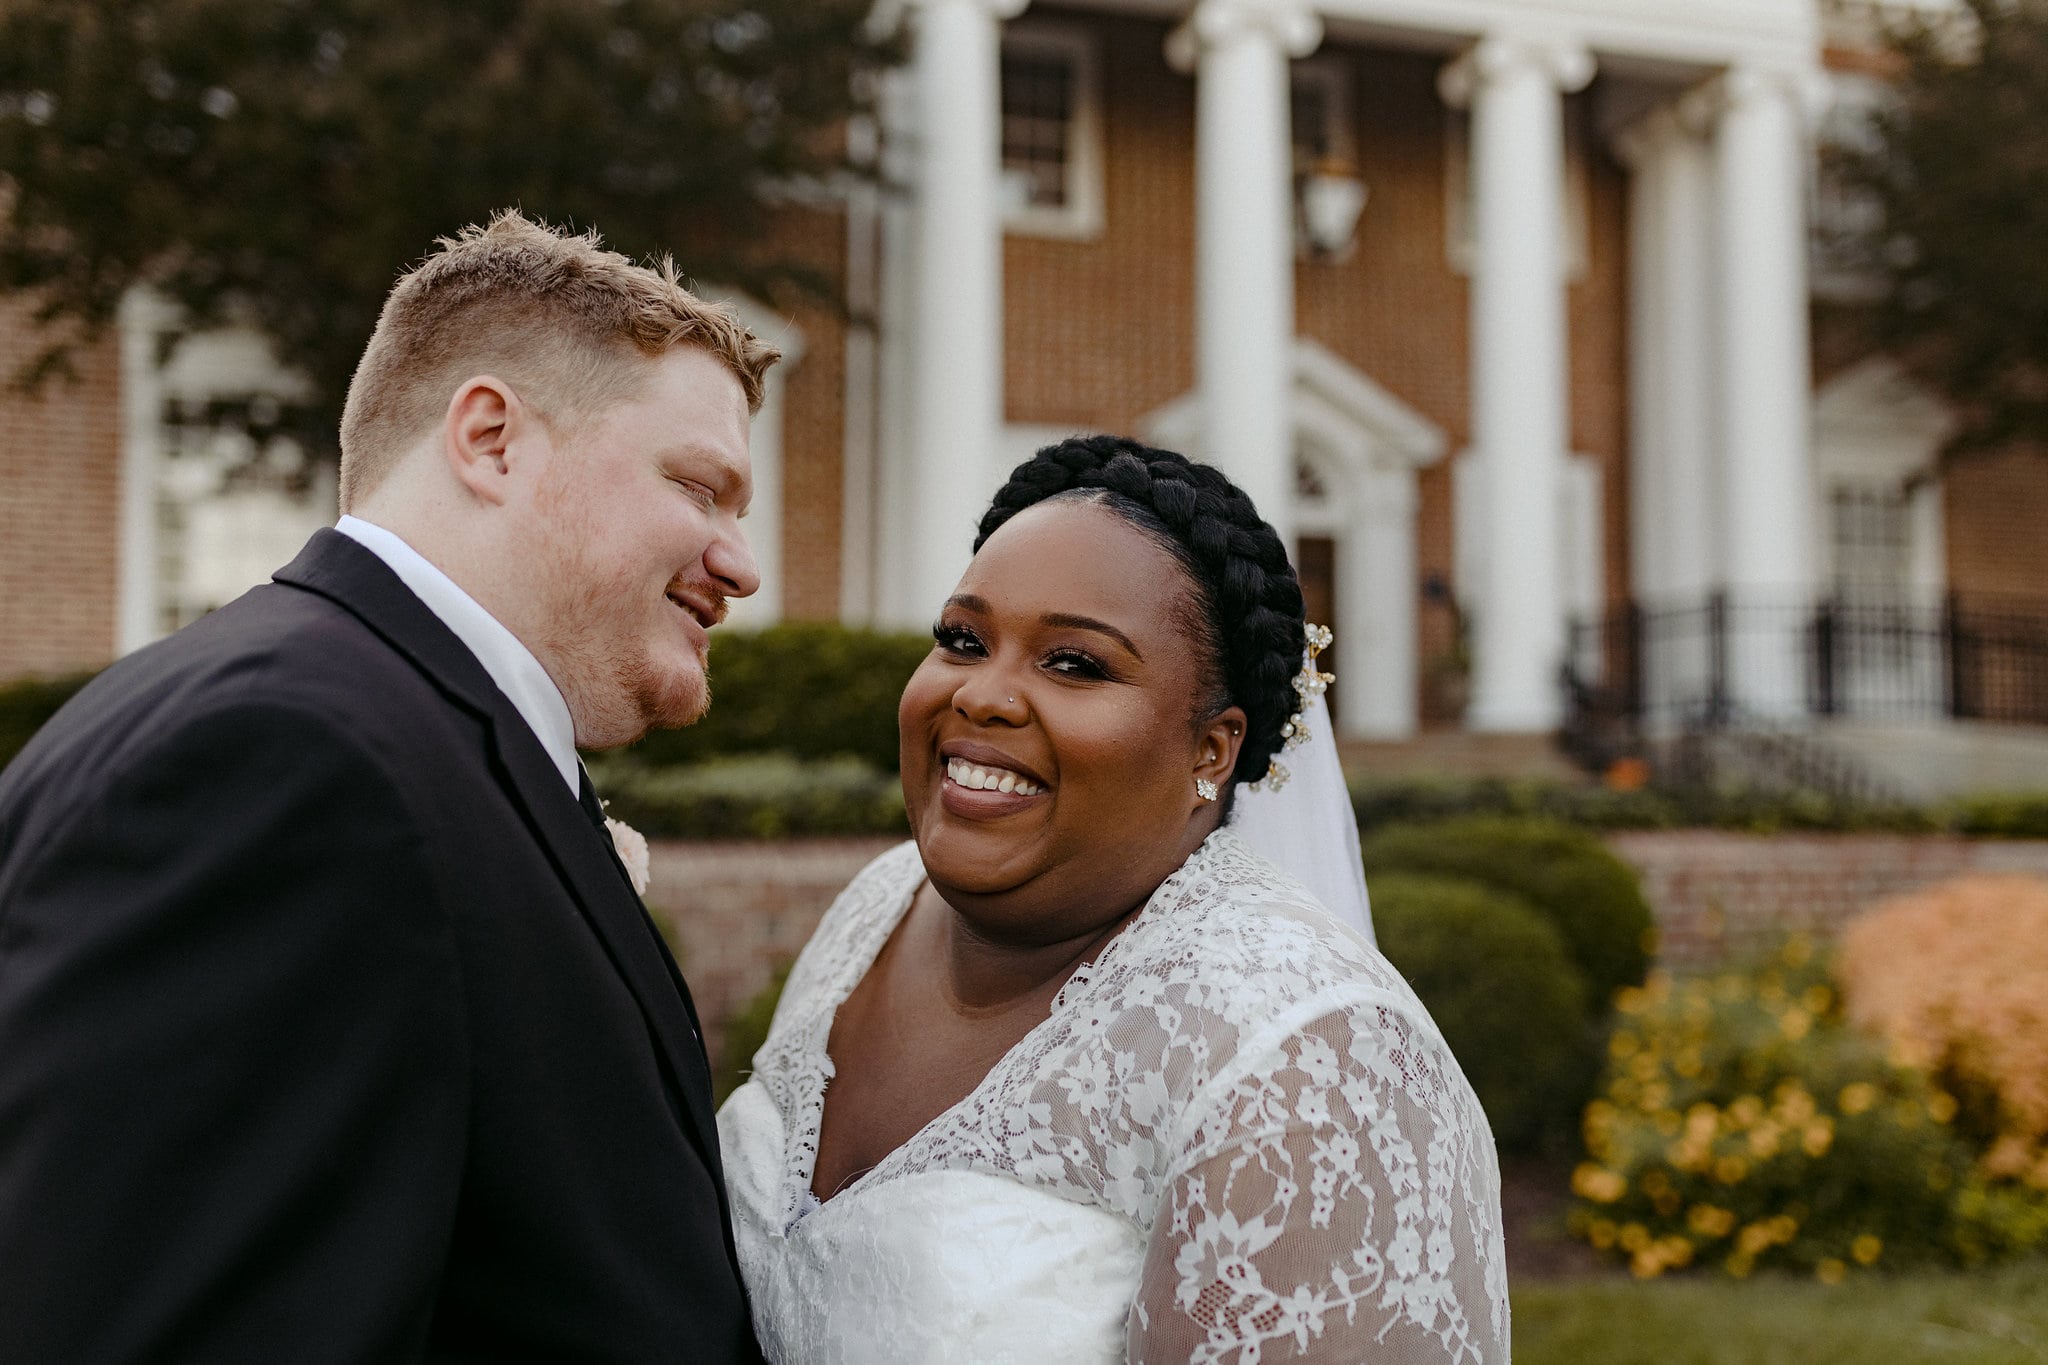 a mixed-race couple in wedding clothes smiles in front of a brick building with white columns